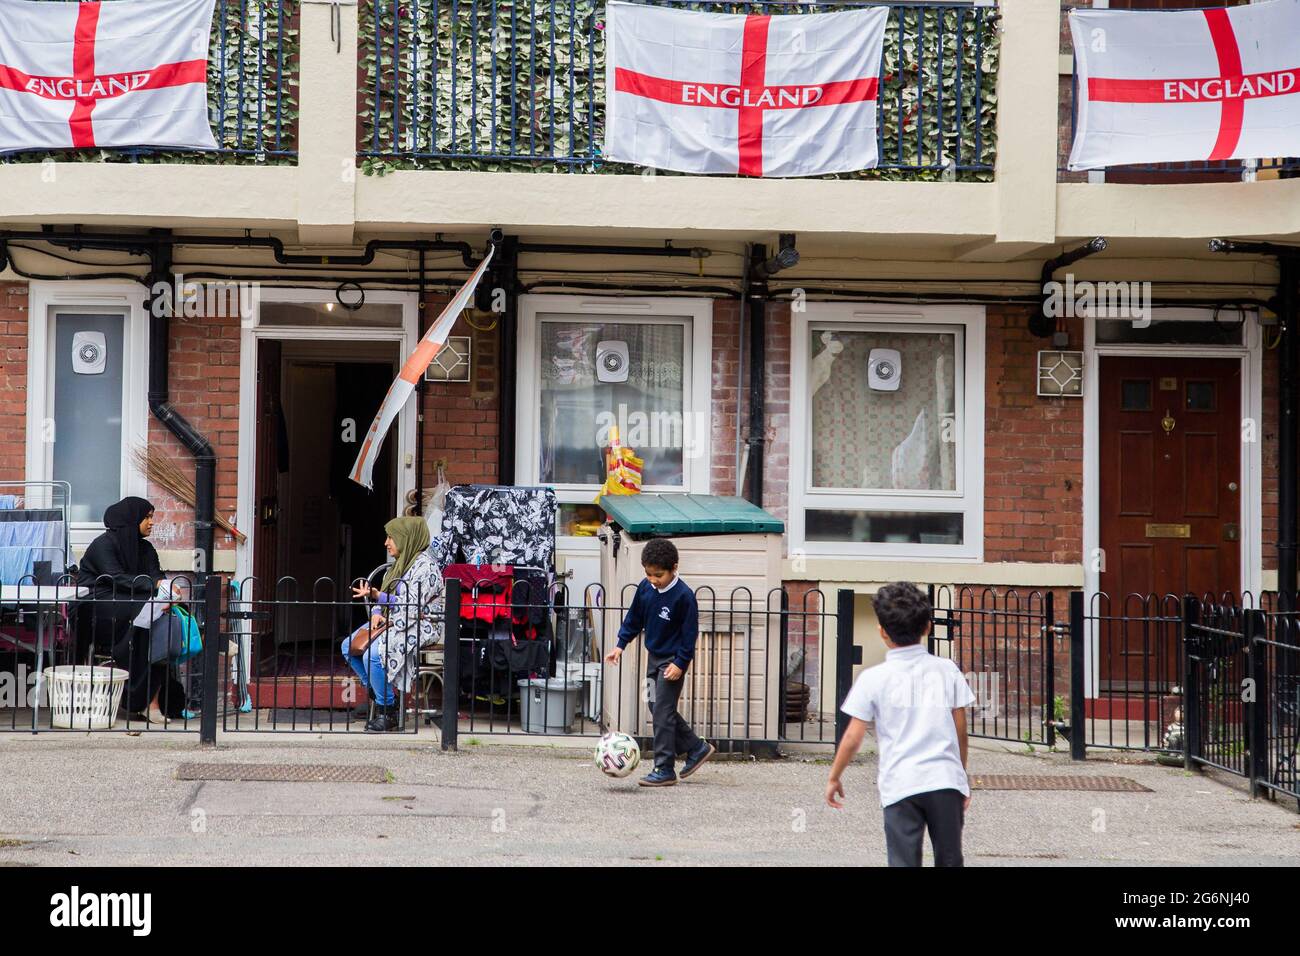 London, UK. 7th July, 2021. Children play at the Kirby estate in Bermondsey, south-east London. A housing estate has been covered with England flags ahead of the semi final match against Denmark. Credit: Thabo Jaiyesimi/SOPA Images/ZUMA Wire/Alamy Live News Stock Photo